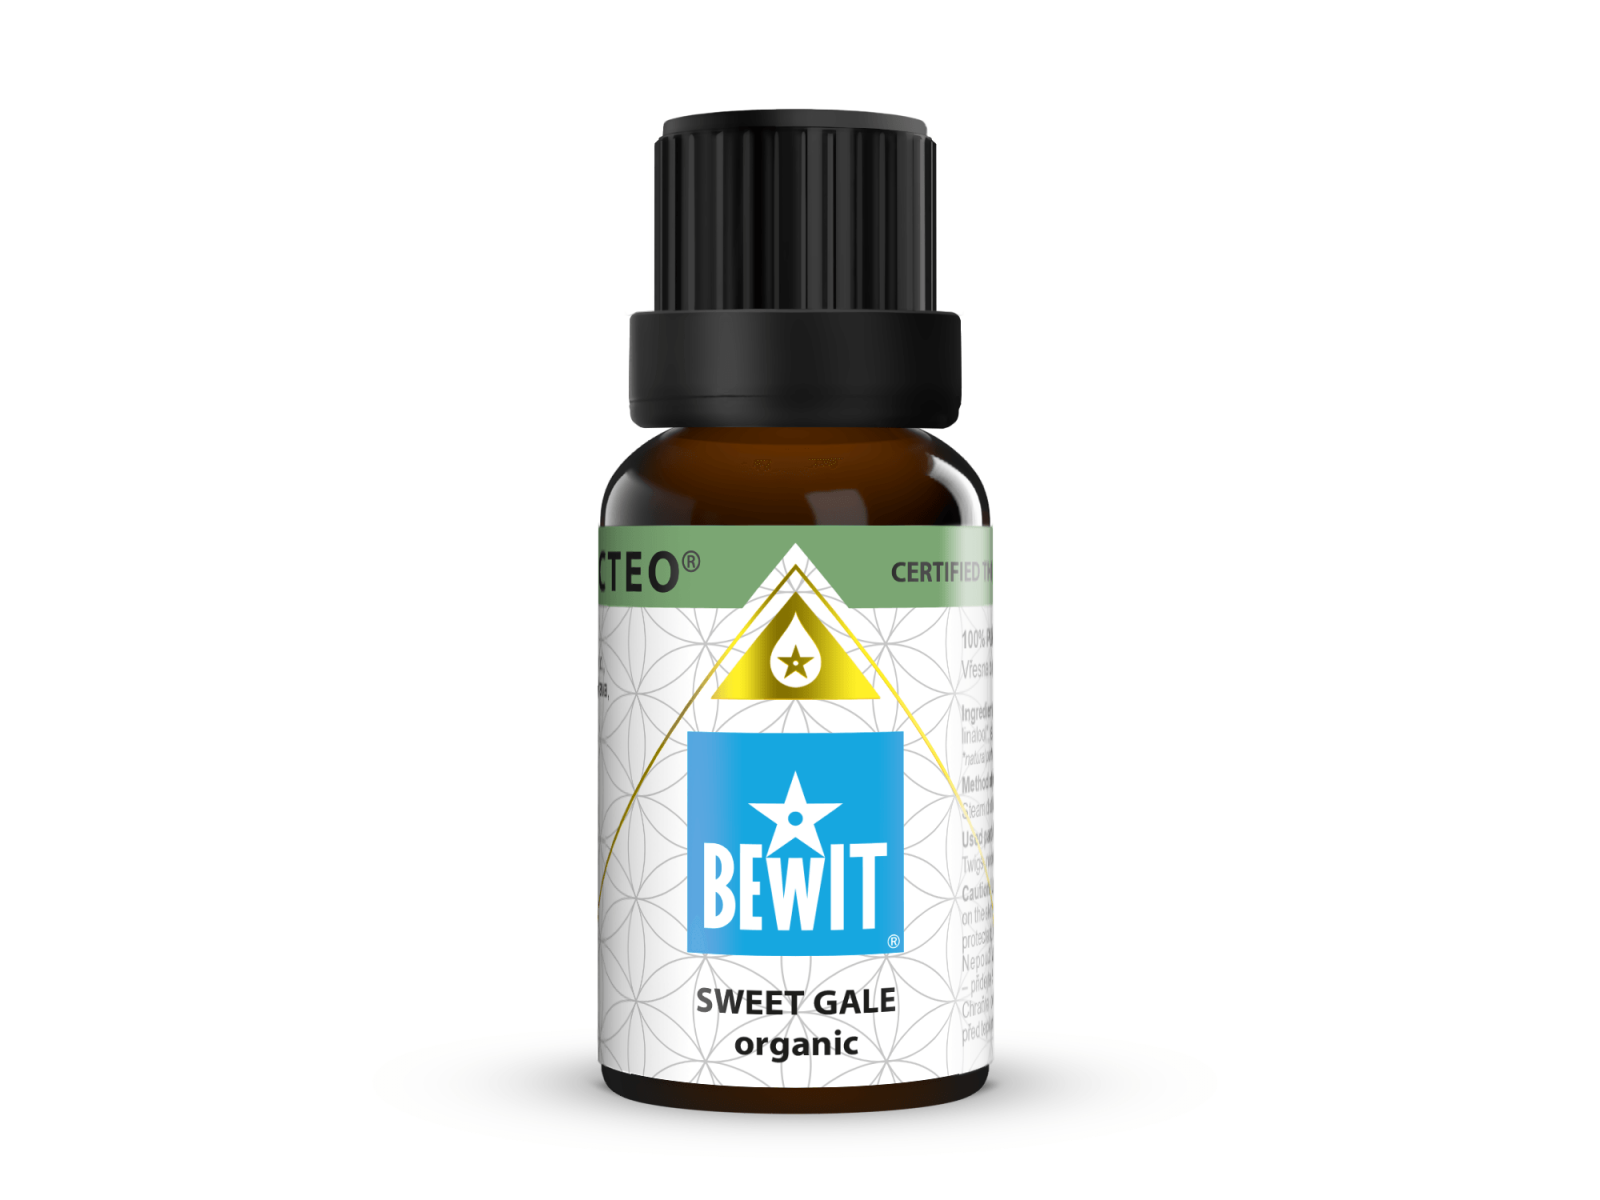 BEWIT Sweetgale organic - 100% pure and natural CTEO® essential oil - 3